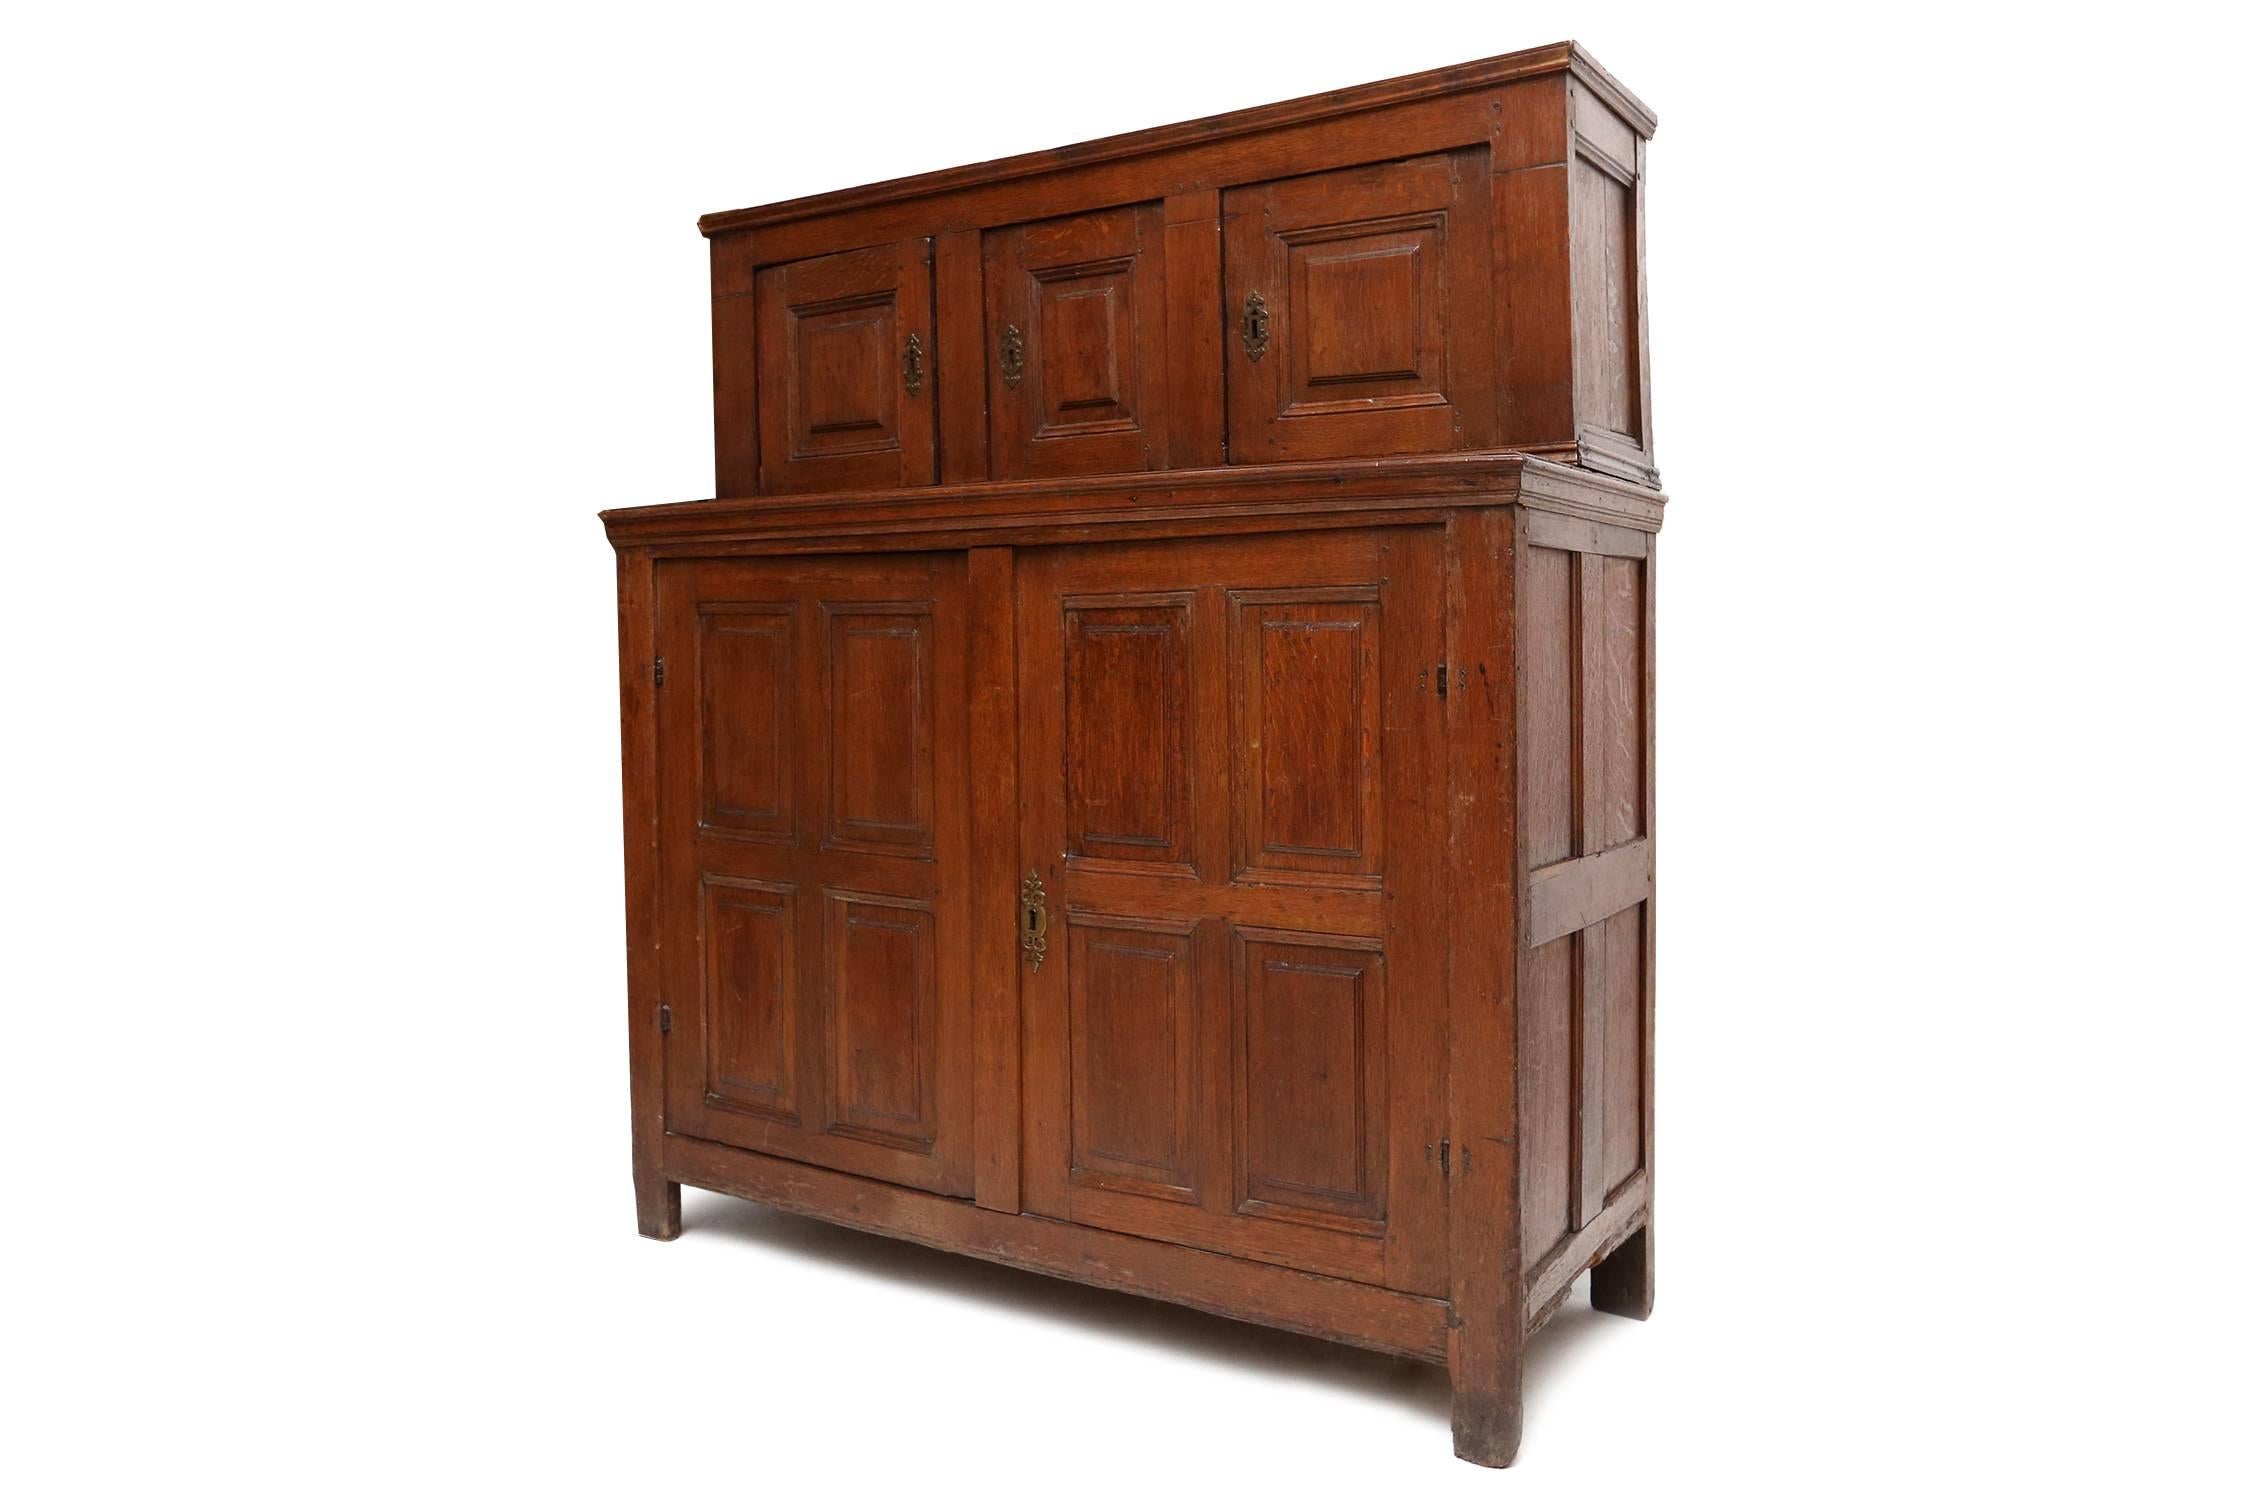 Solid oak cabinet - meuble deux corps, France, circa 1780
real minimalistic type of antique furniture
suits well in an antique inspired or eclectic kind of interior 
Measures: H 157 cm, D 55 cm, L 142 cm.
Check out our Goldwood storefront for more